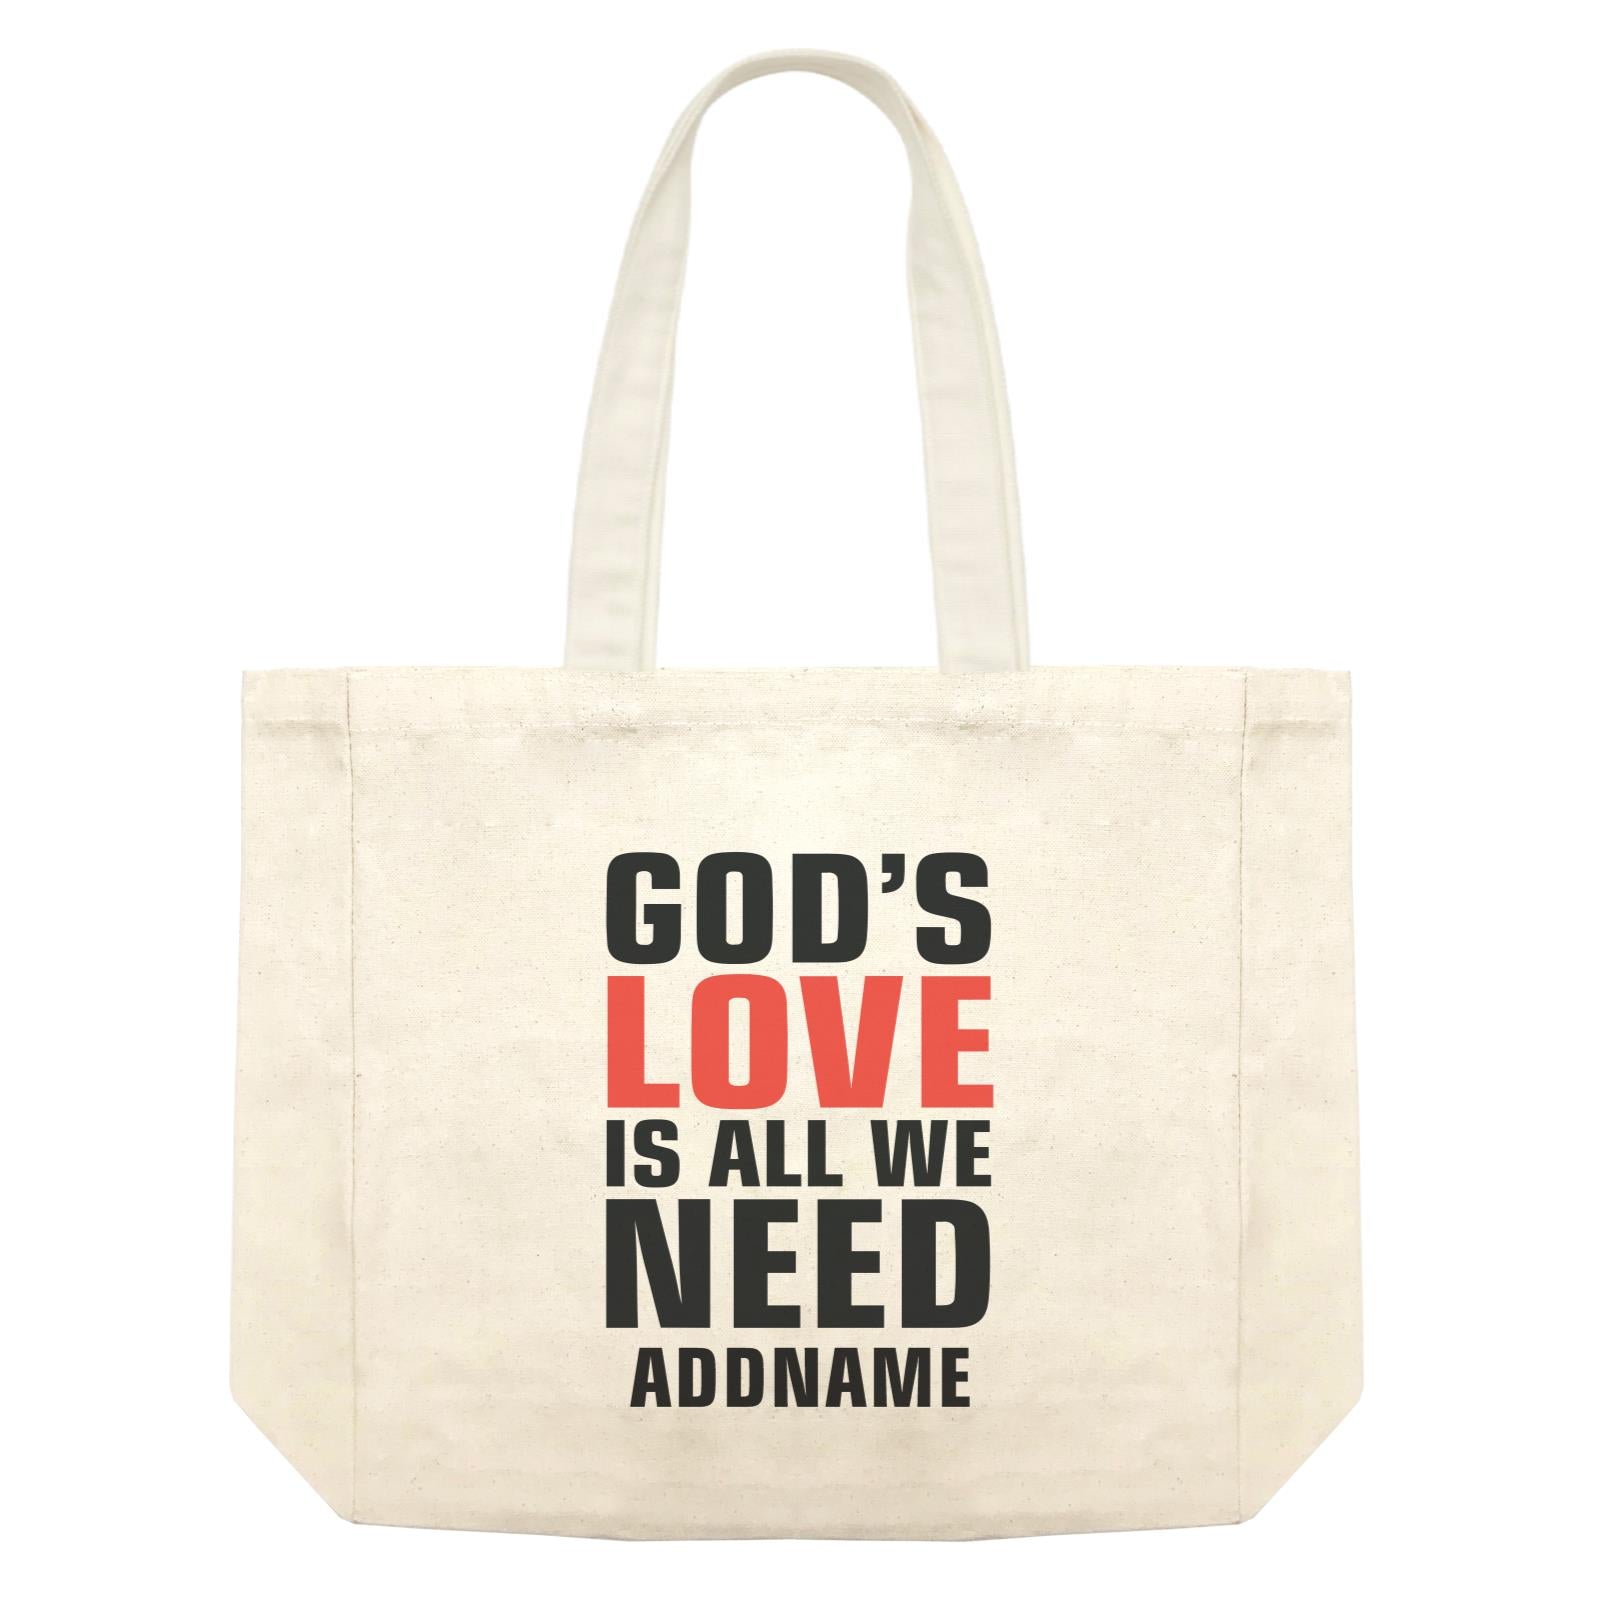 Inspiration Quotes God's Love Is All We Need Addname Shopping Bag